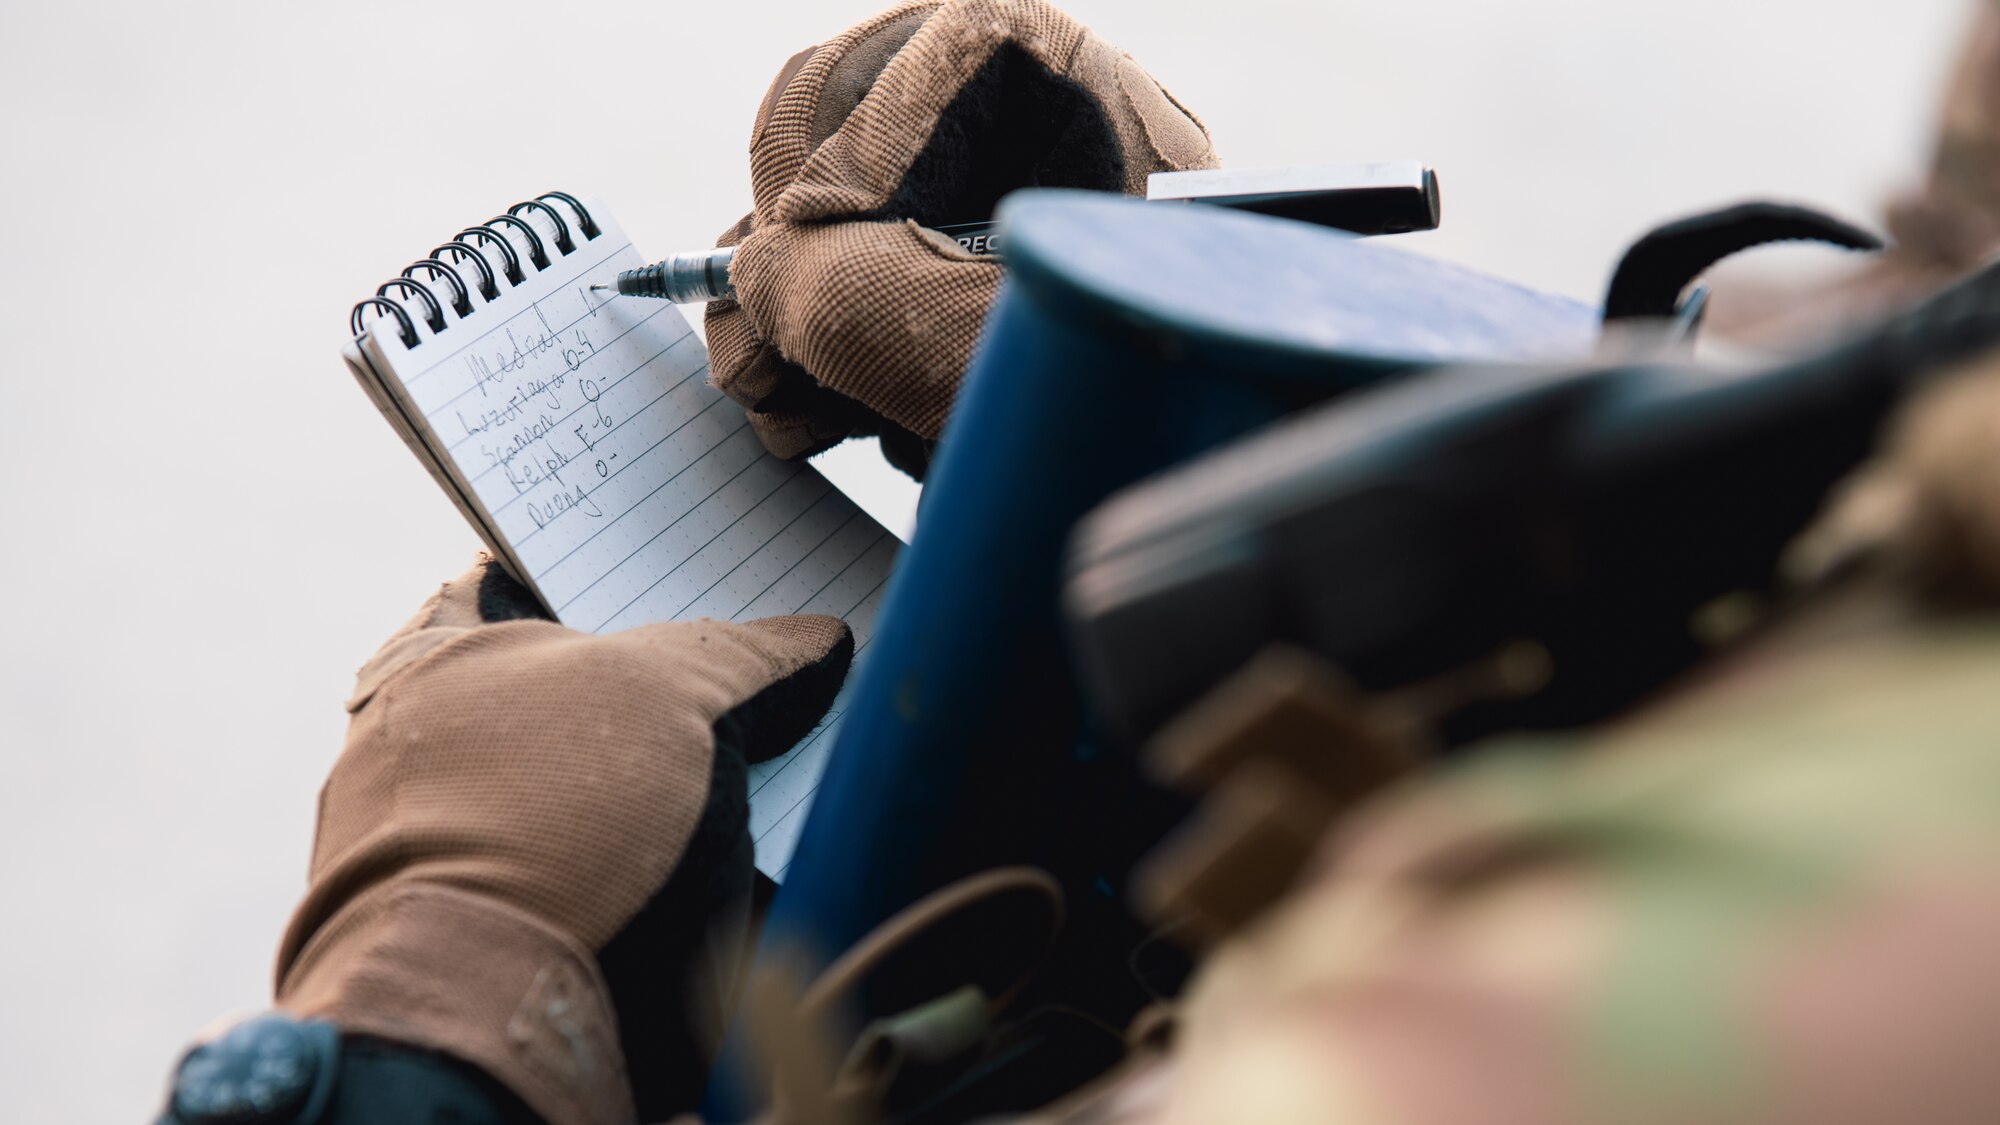 Airman writes notes on a notepad.